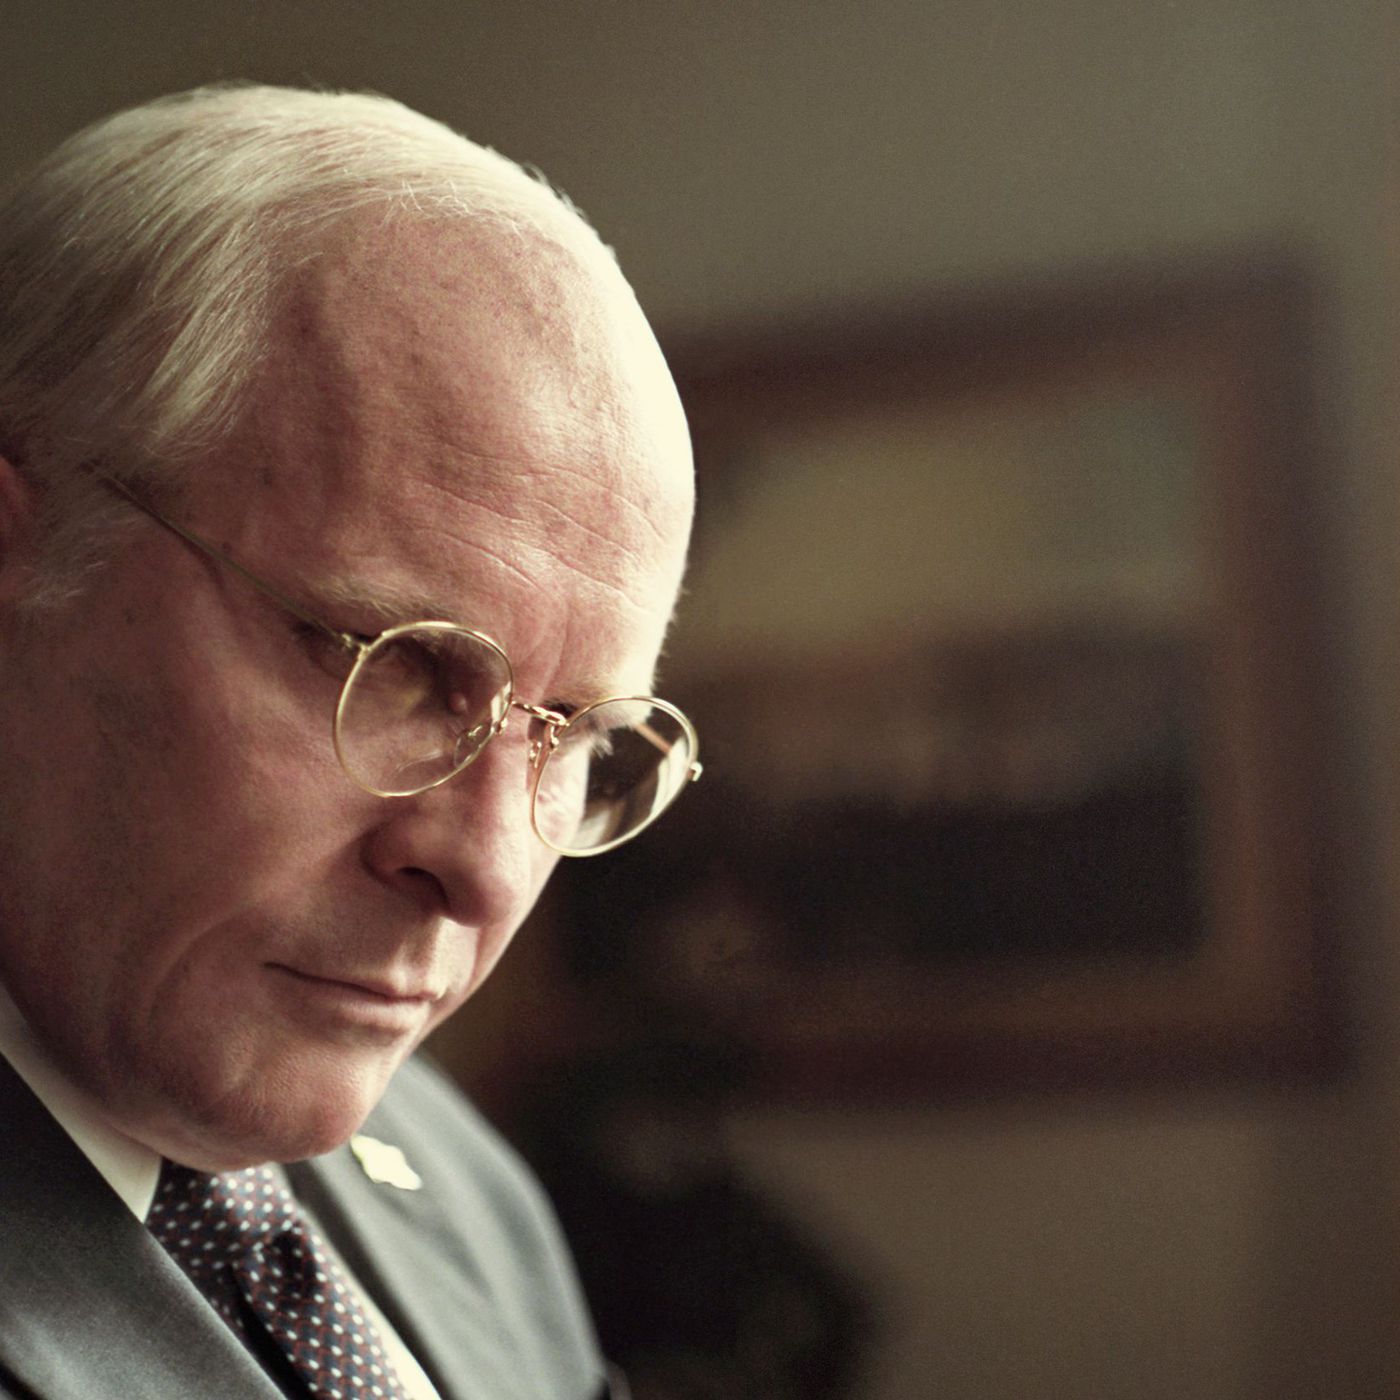 Vice review: instead of humanizing Dick Cheney, the movie demonizes America  - Vox